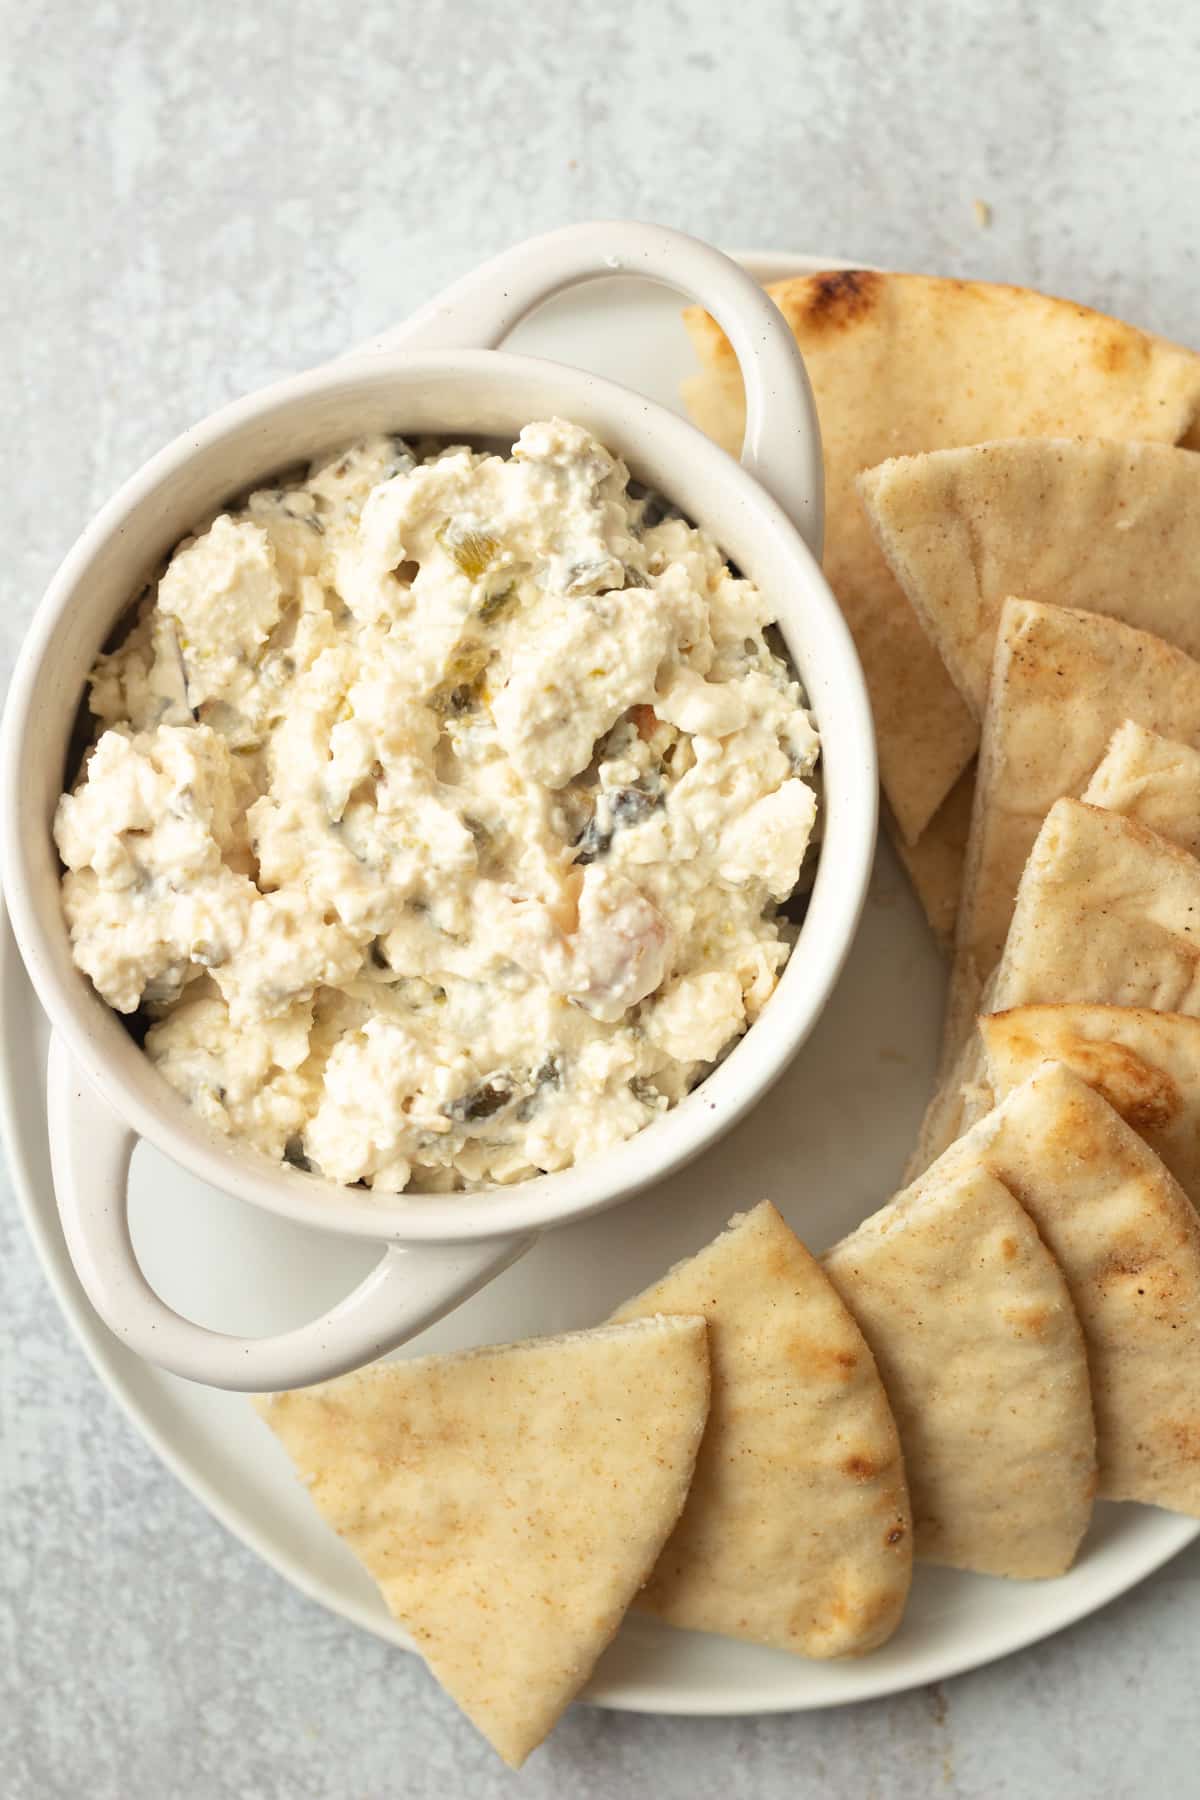 Spicy feta dip in bowl on plate with cut up pita.